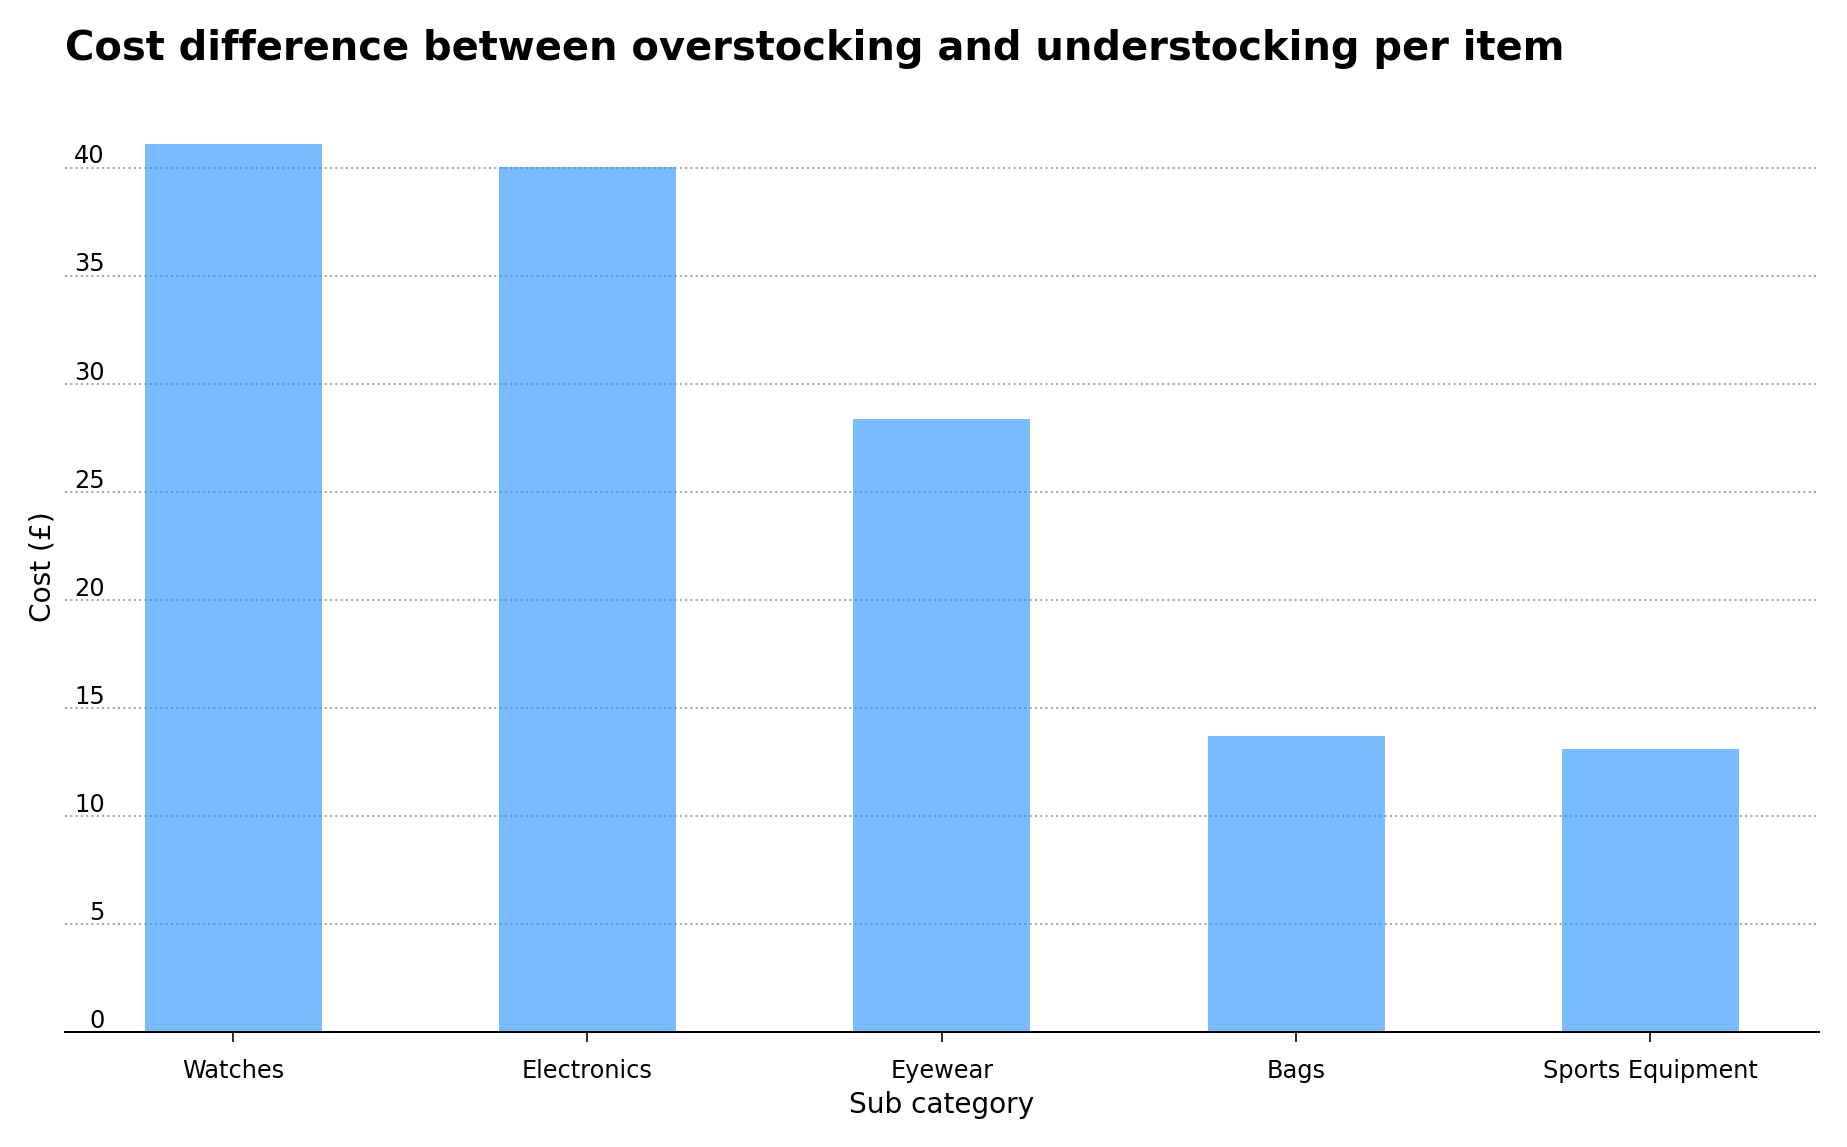 Positive difference between overstocking and understocking costs for the top five sub-categories